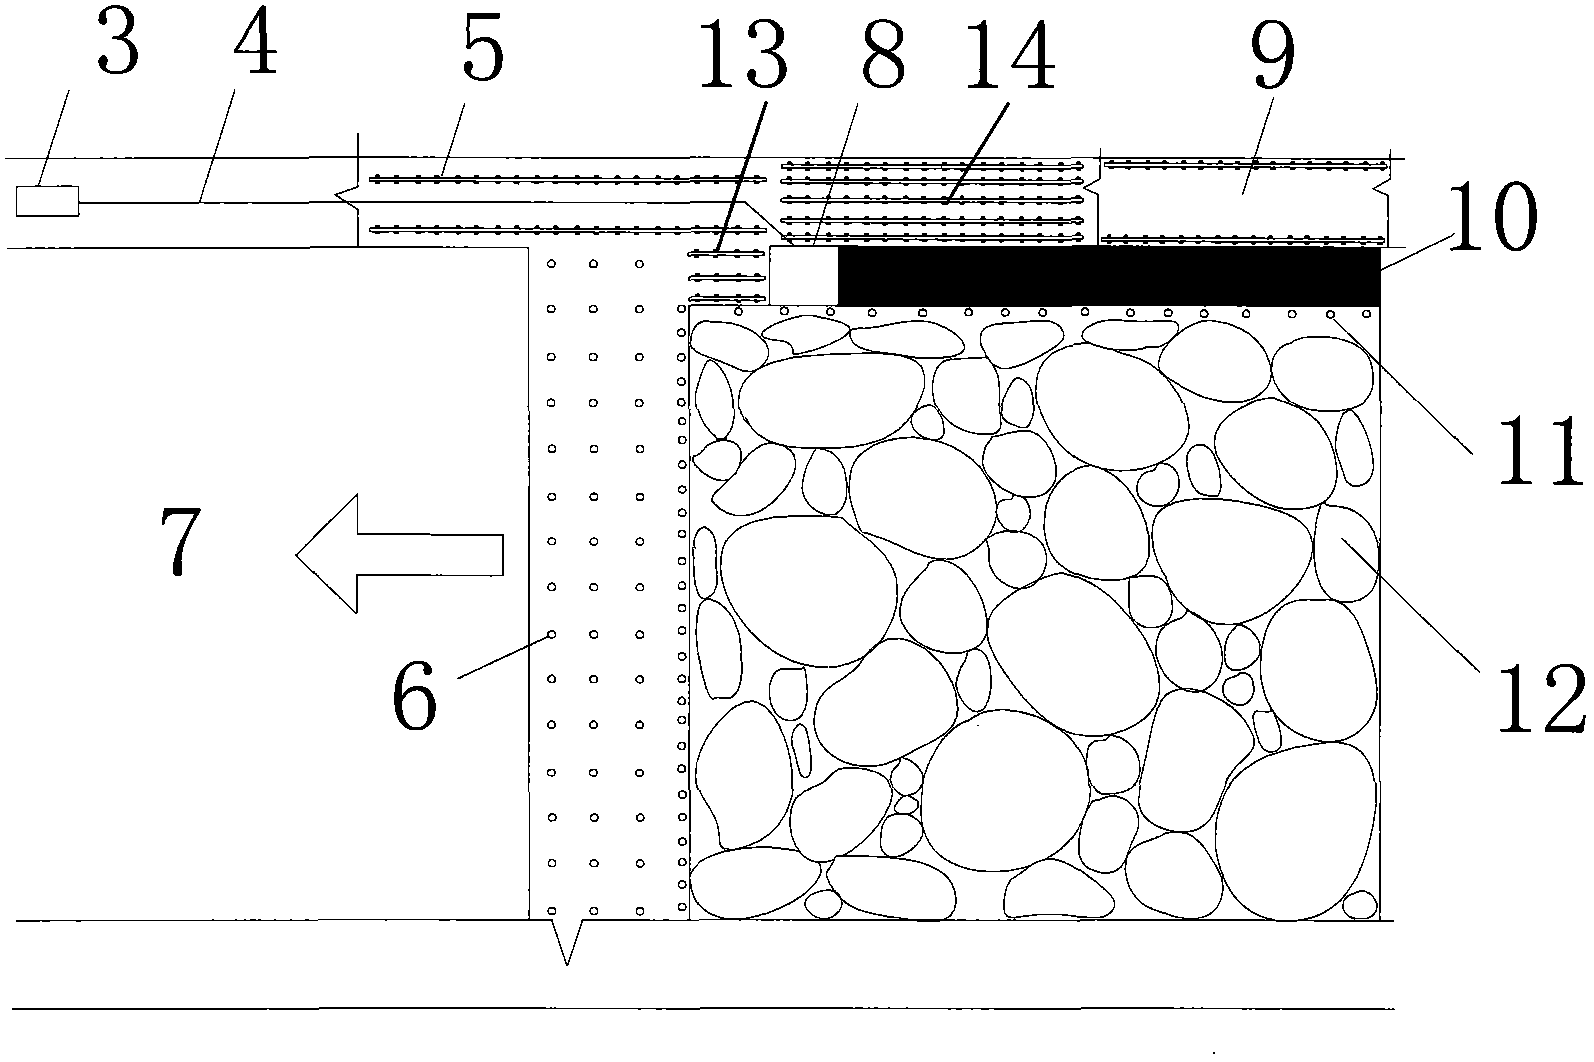 Roadside proper yielding unequal combined filling structure of gob-side entry retaining and construction method